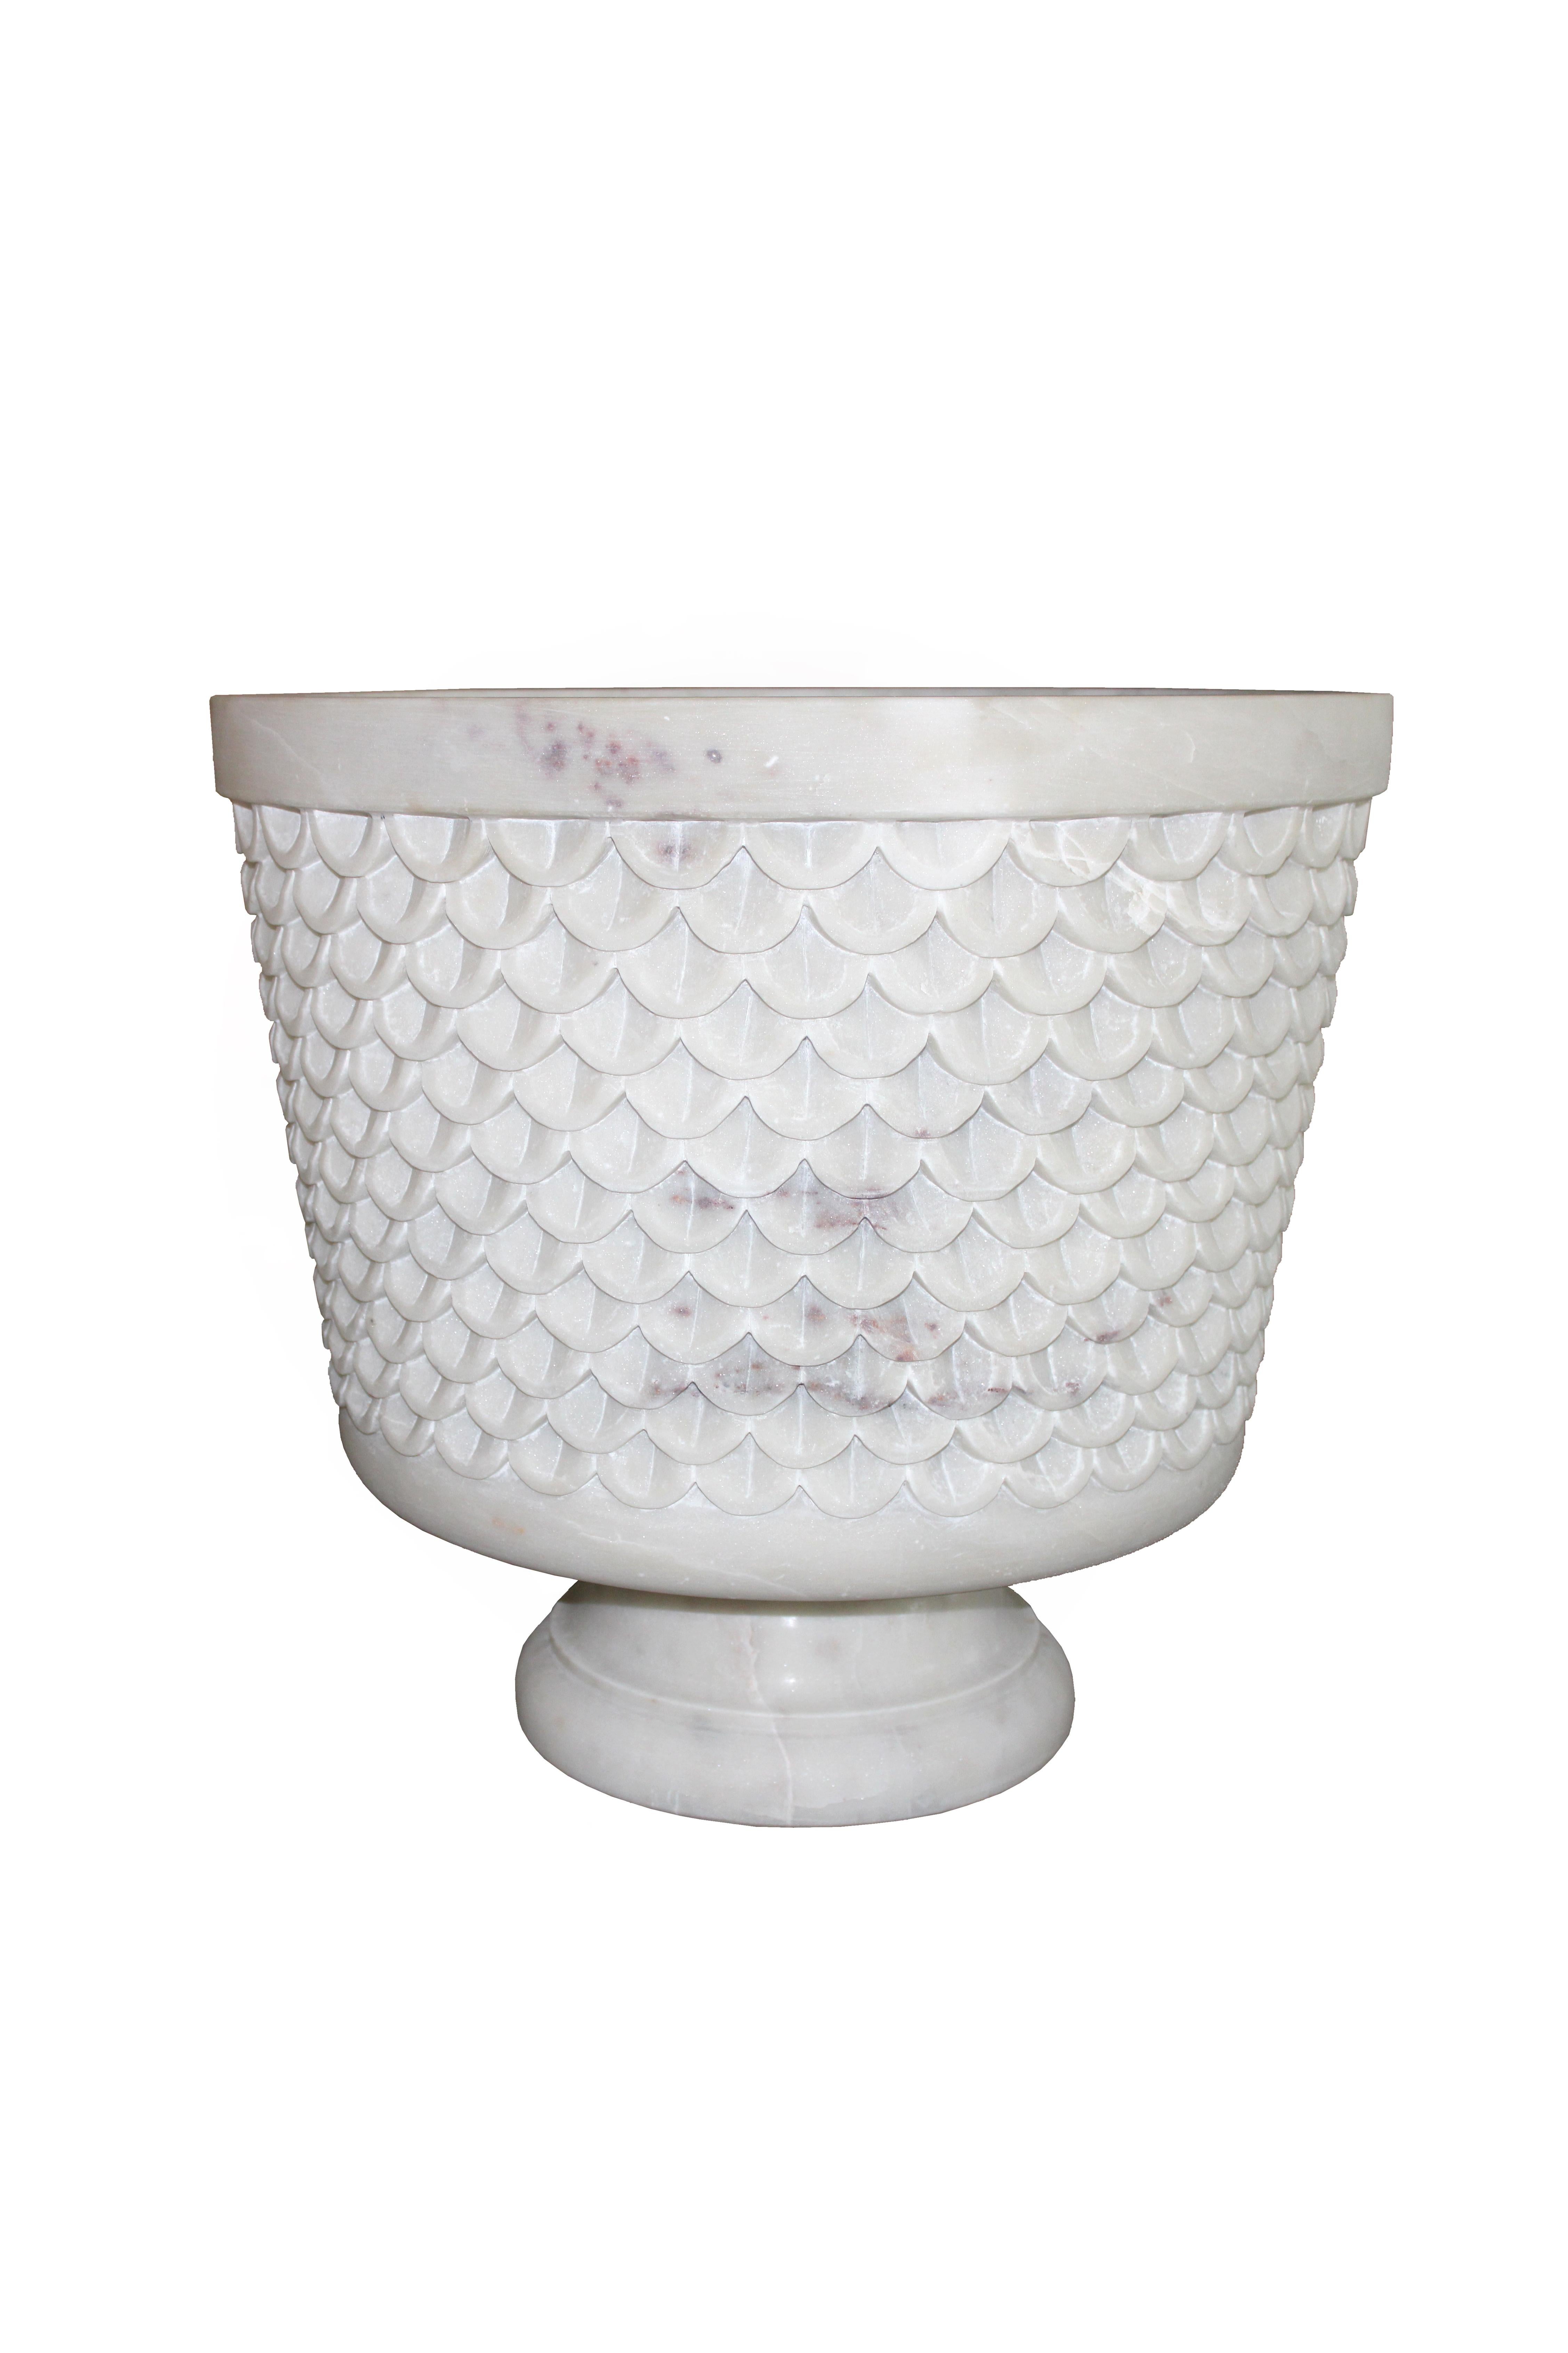 Other Fish Scale Urn in White Marble Handcrafted in India by Stephanie Odegard For Sale